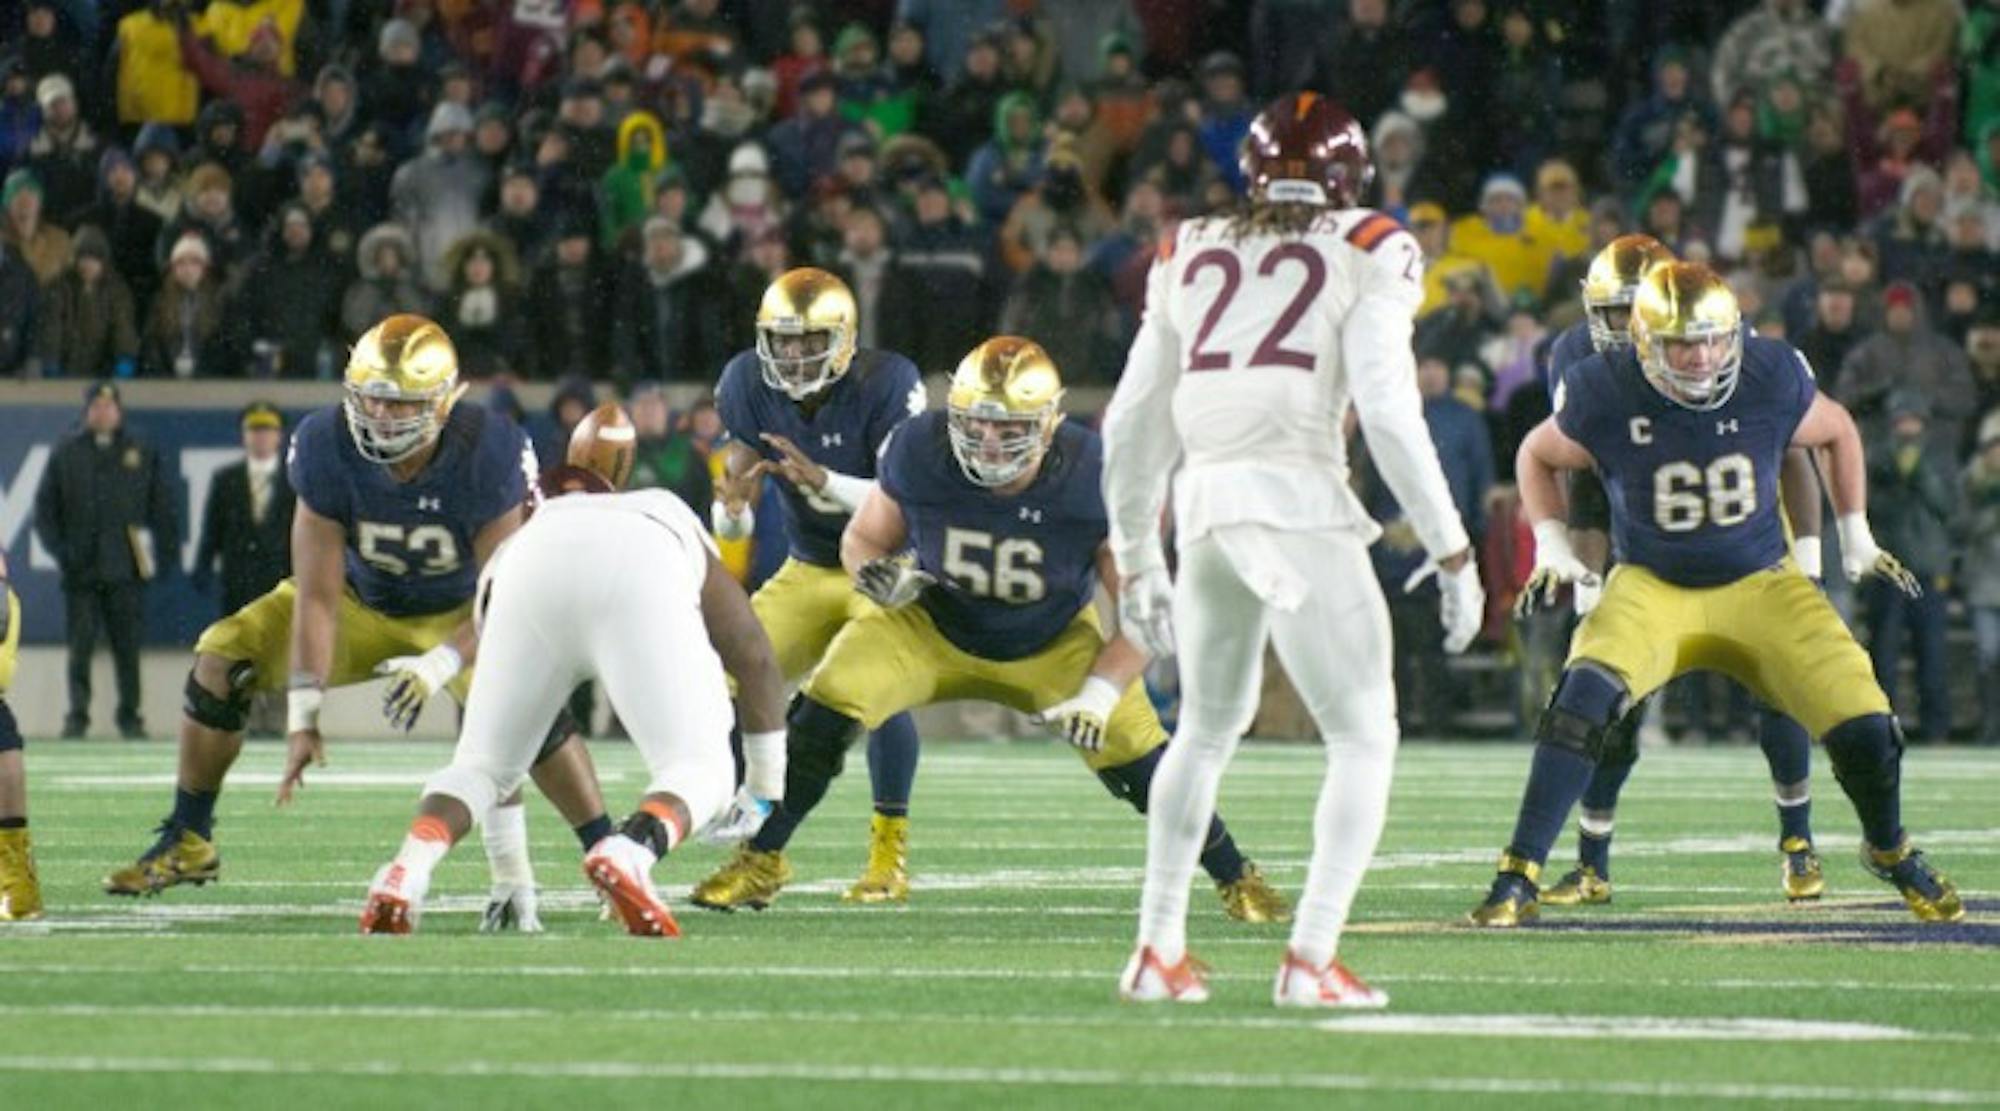 Irish senior offensive lineman Quenton Nelson, center, and graduate student offensive lineman Mike McGlinchey, right, drop back in pass protection after a snap during Notre Dame’s 34-31 loss to Virginia Tech on Nov. 19 at Notre Dame Stadium. Both Nelson and McGlinchey started all 12 games last season and are captains for the Irish this year.